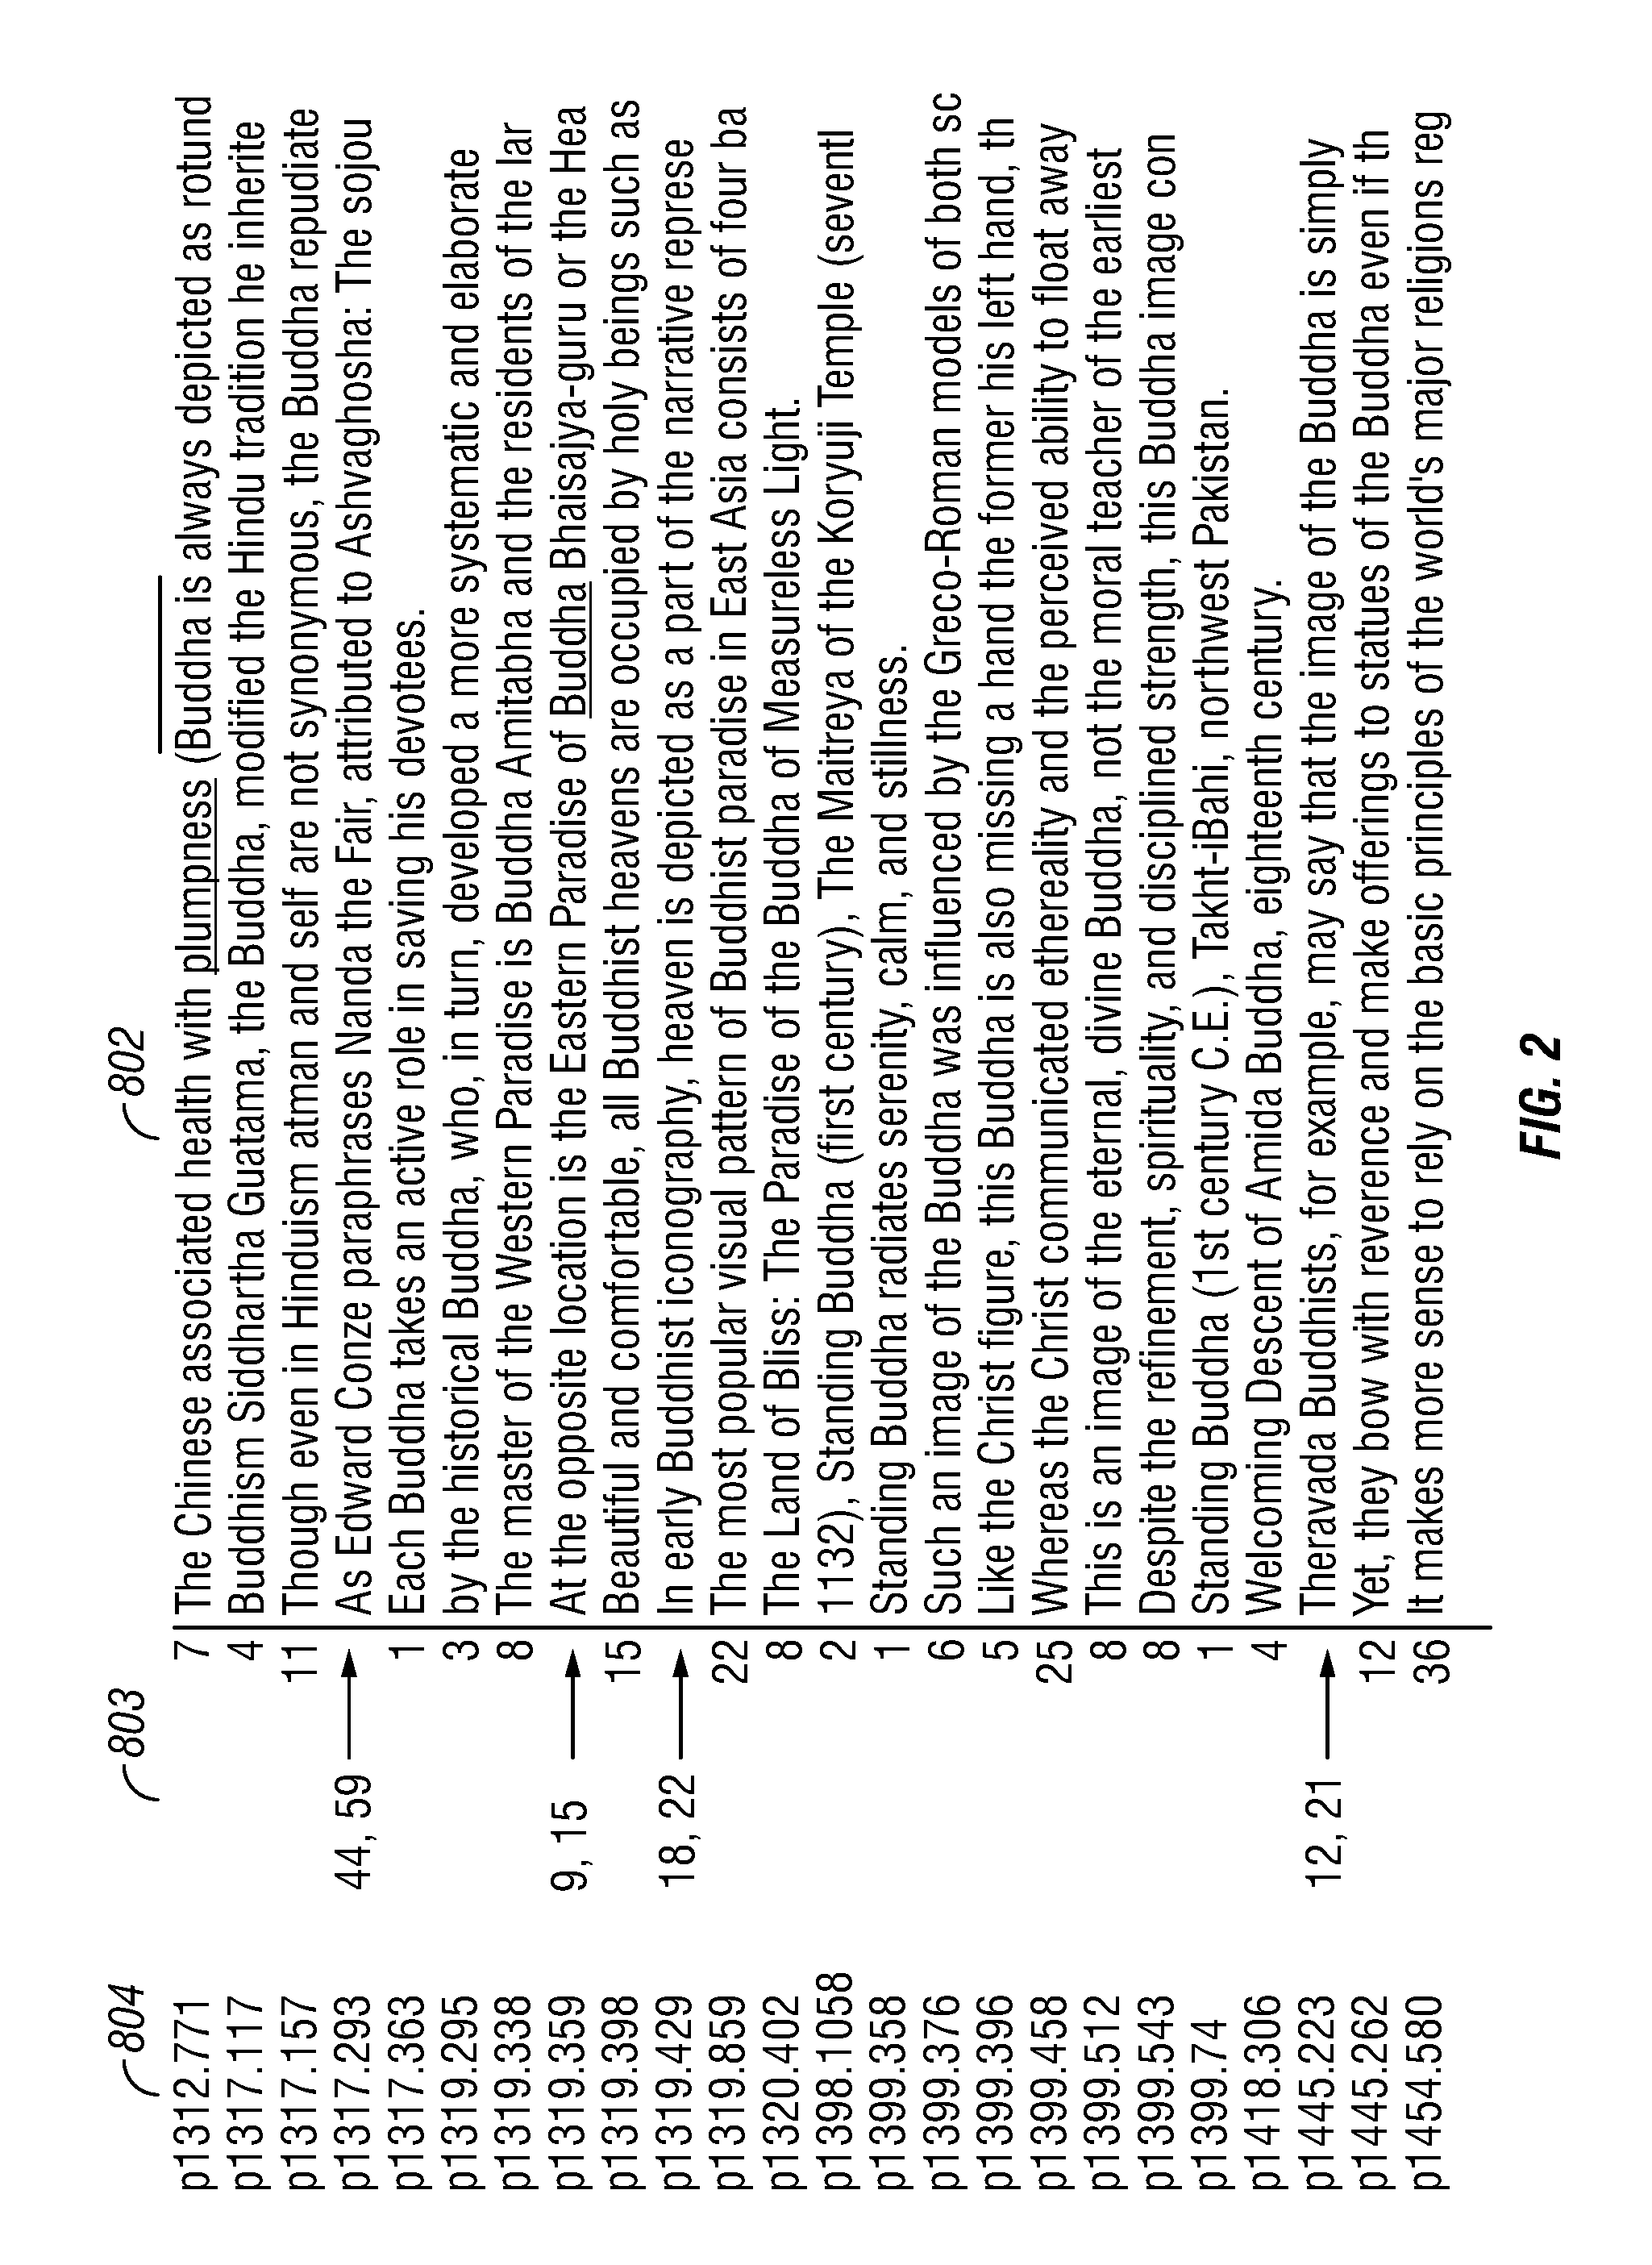 Method and apparatus for real time text analysis and text navigation